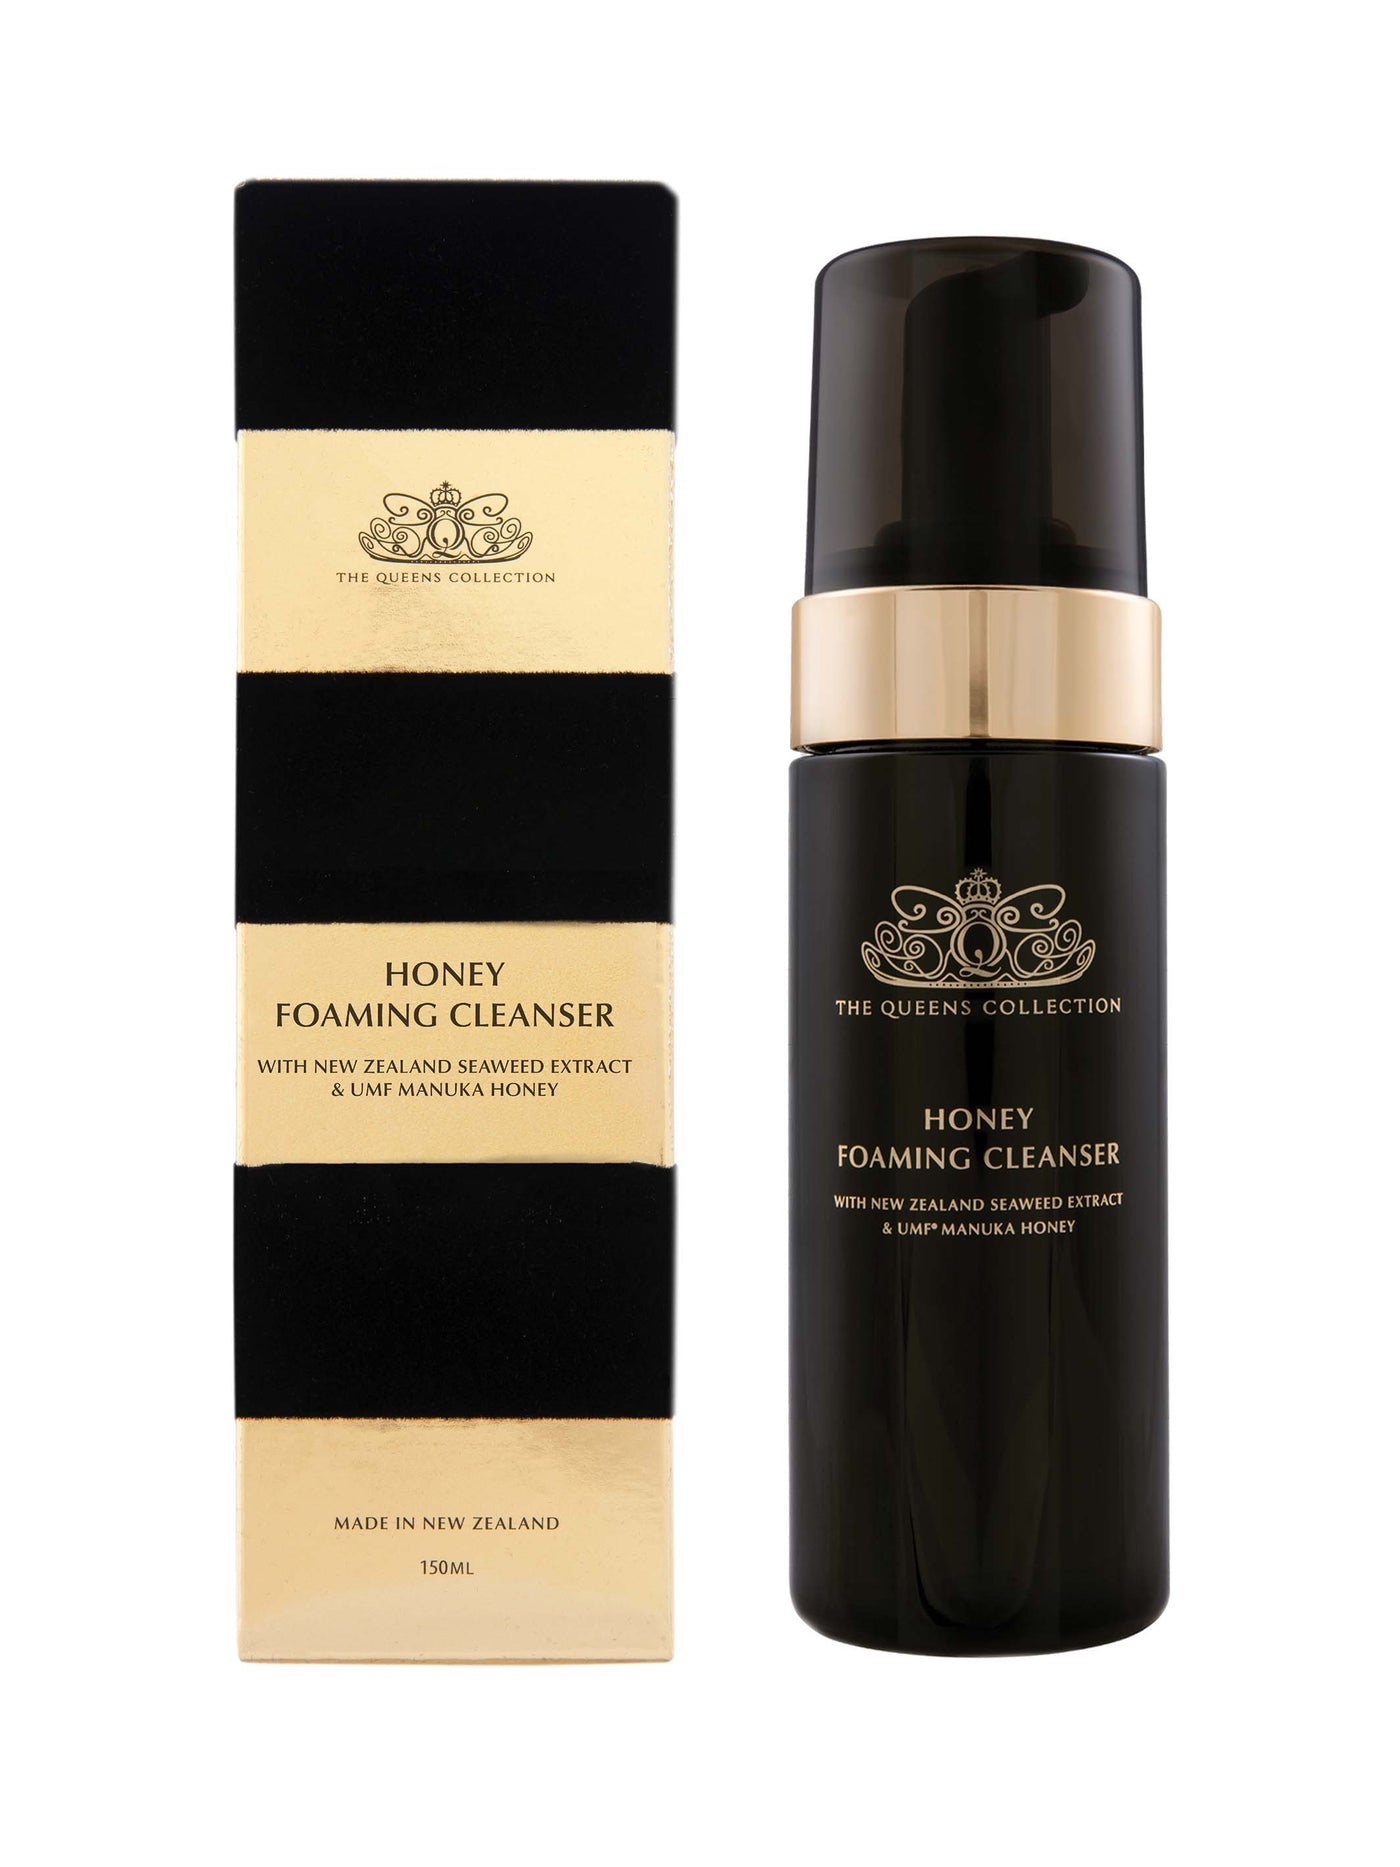 The Queen's Collection - Manuka Honey Foaming Cleanser